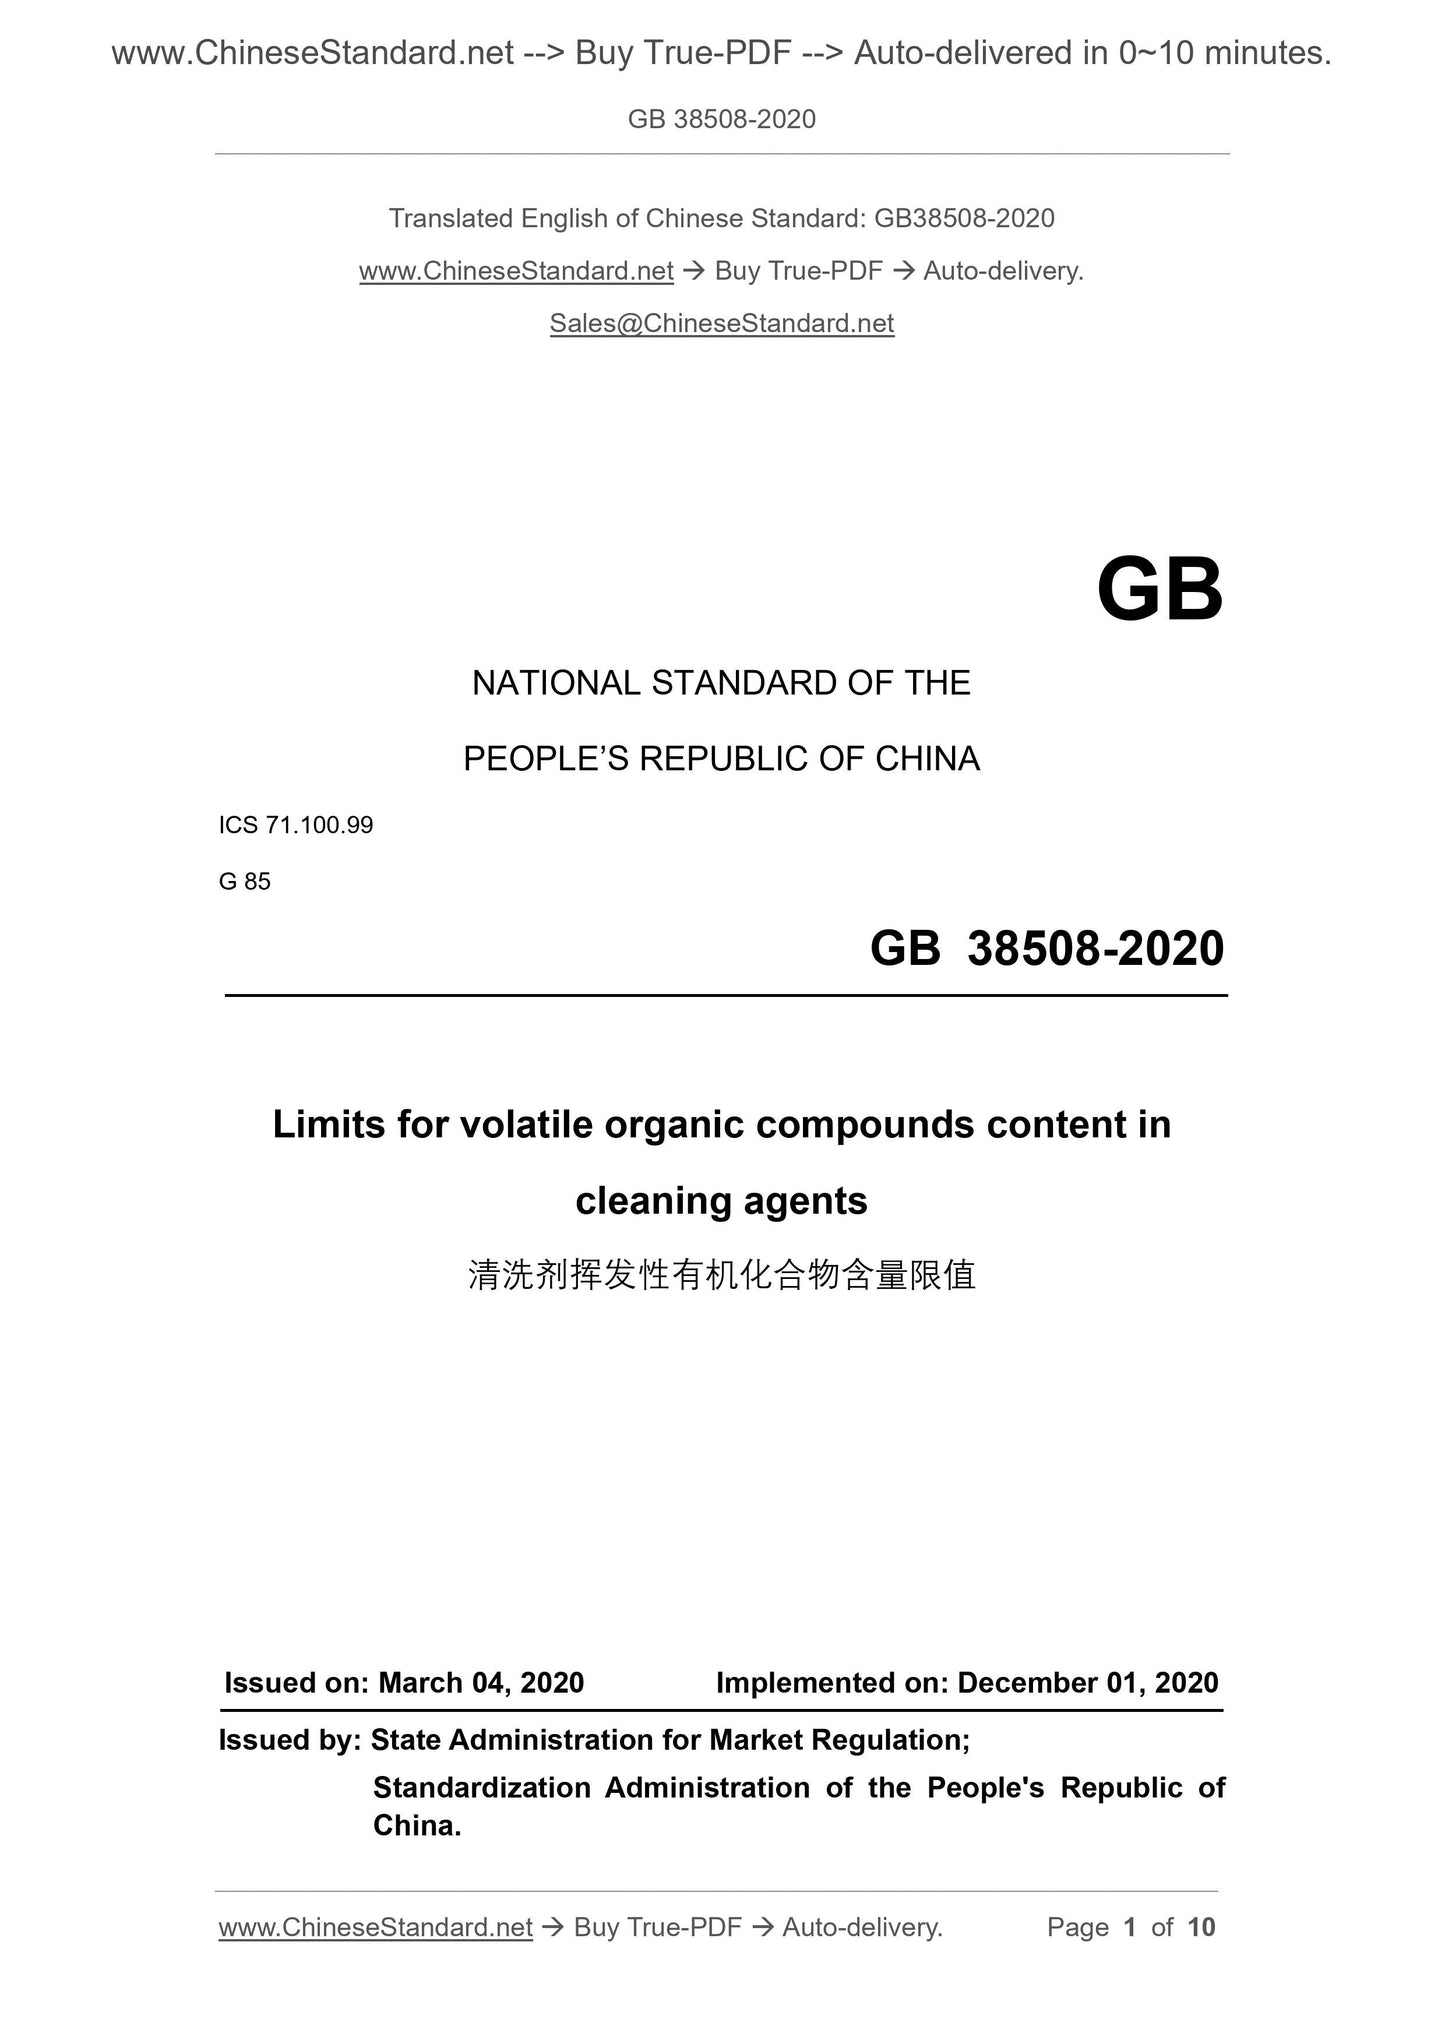 GB 38508-2020 Page 1